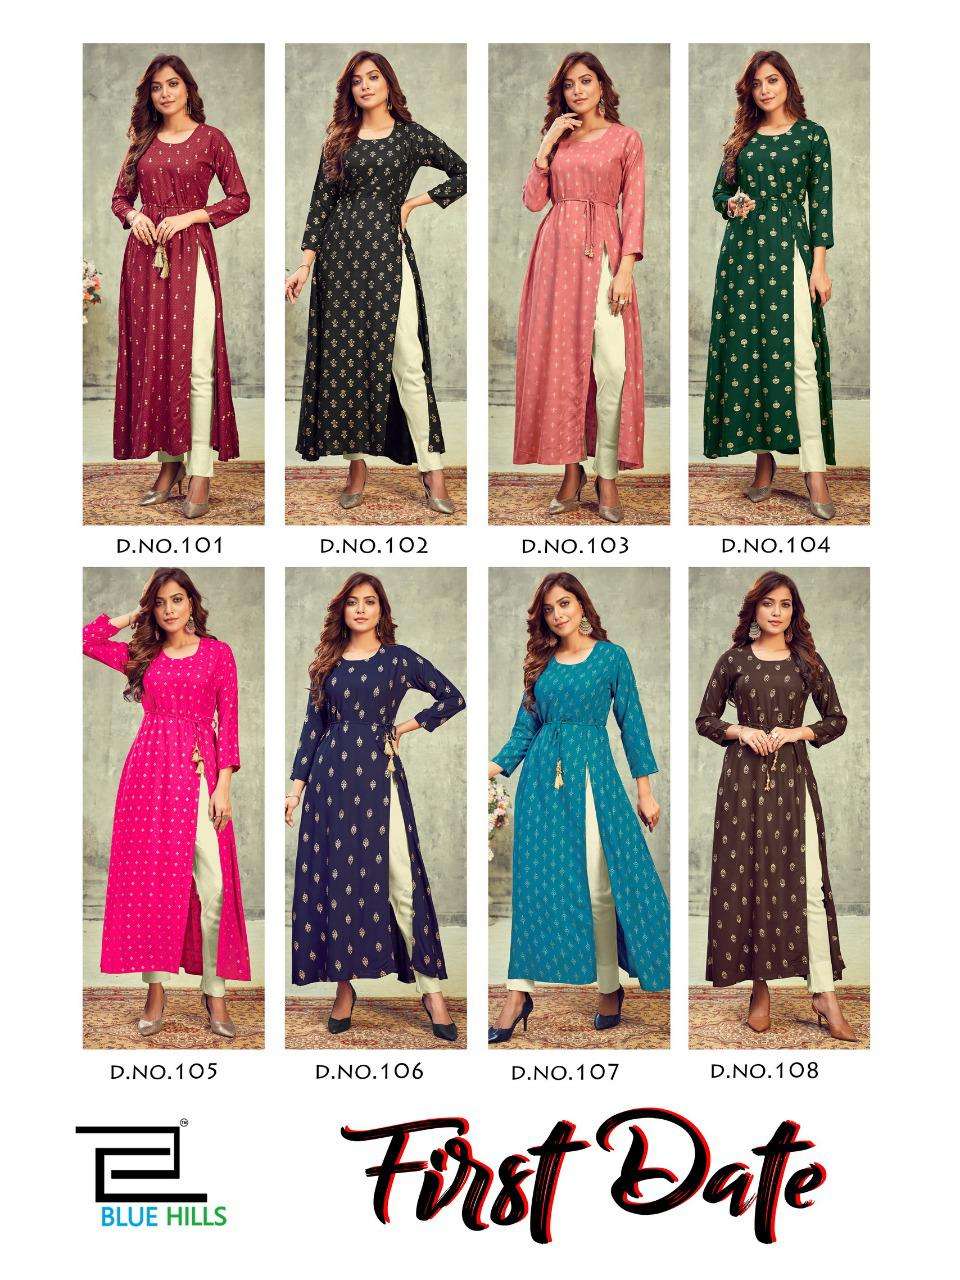 BLUE HILLS PRESENTS FIRST DATE RAYON PRINTED DESIGNER WHOLESALE KURTI COLLECTION